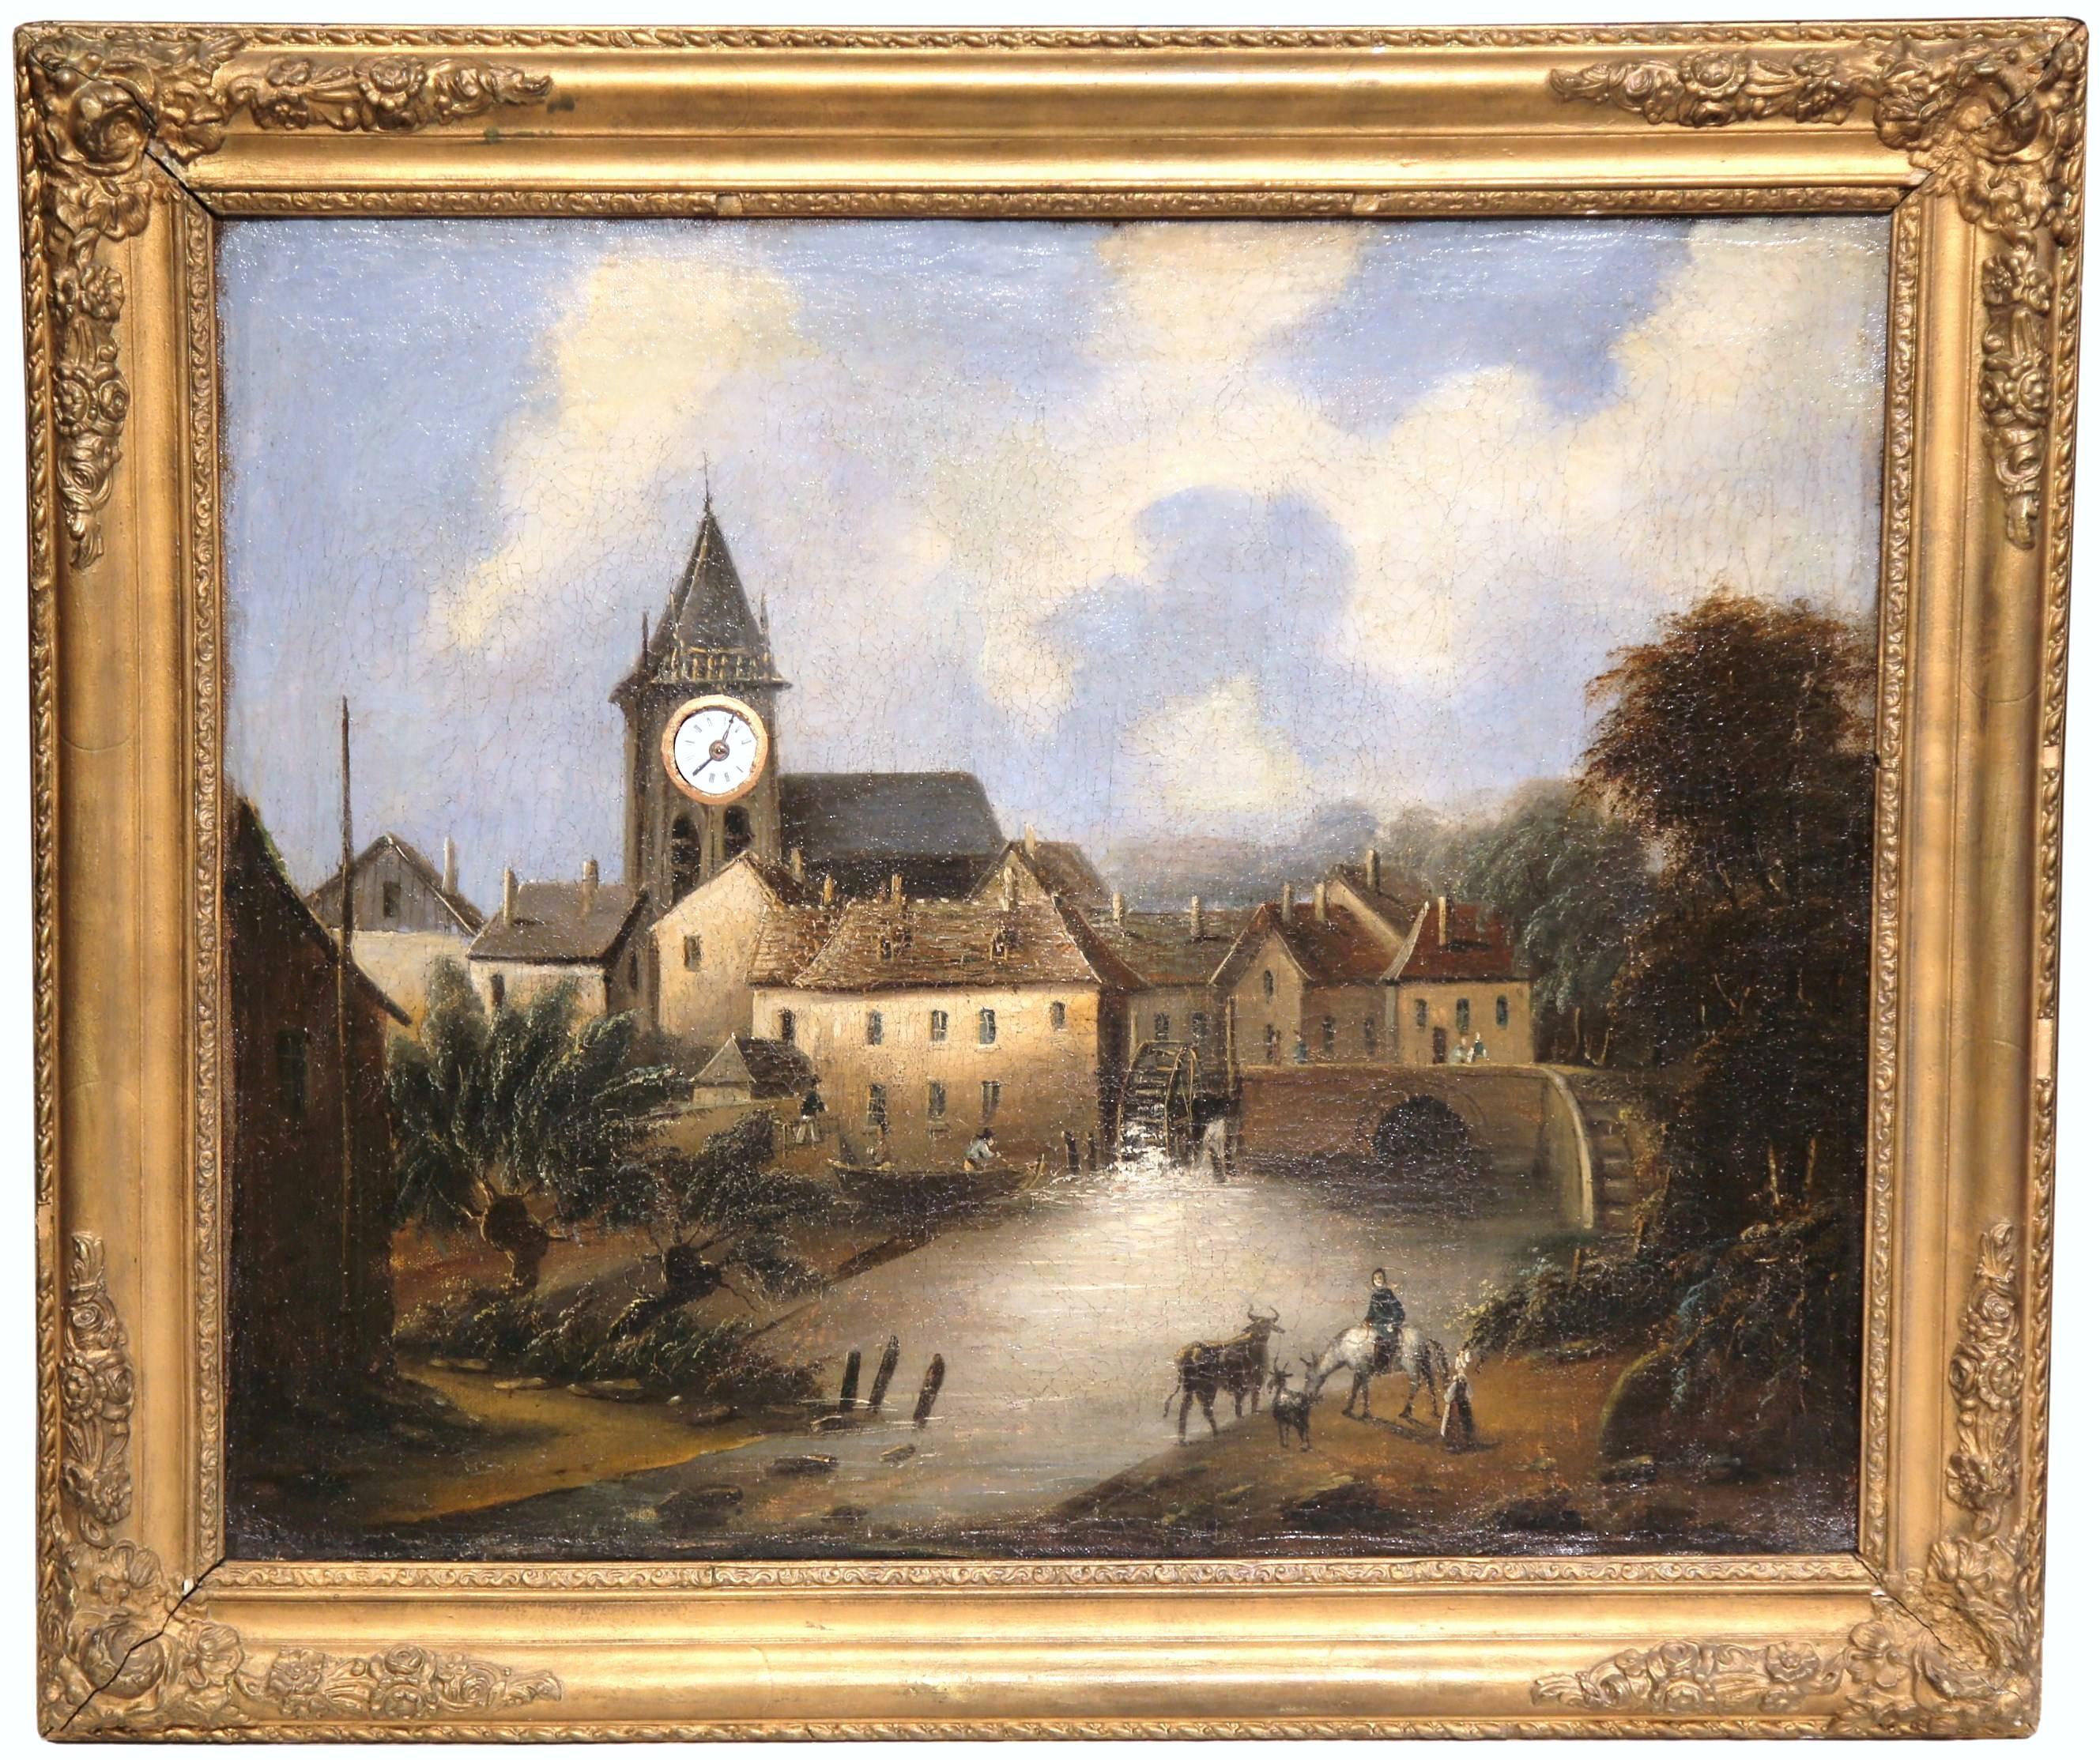 Unknown Landscape Painting - 18th Century French "Clock Painting" with Original Movement in Working Order